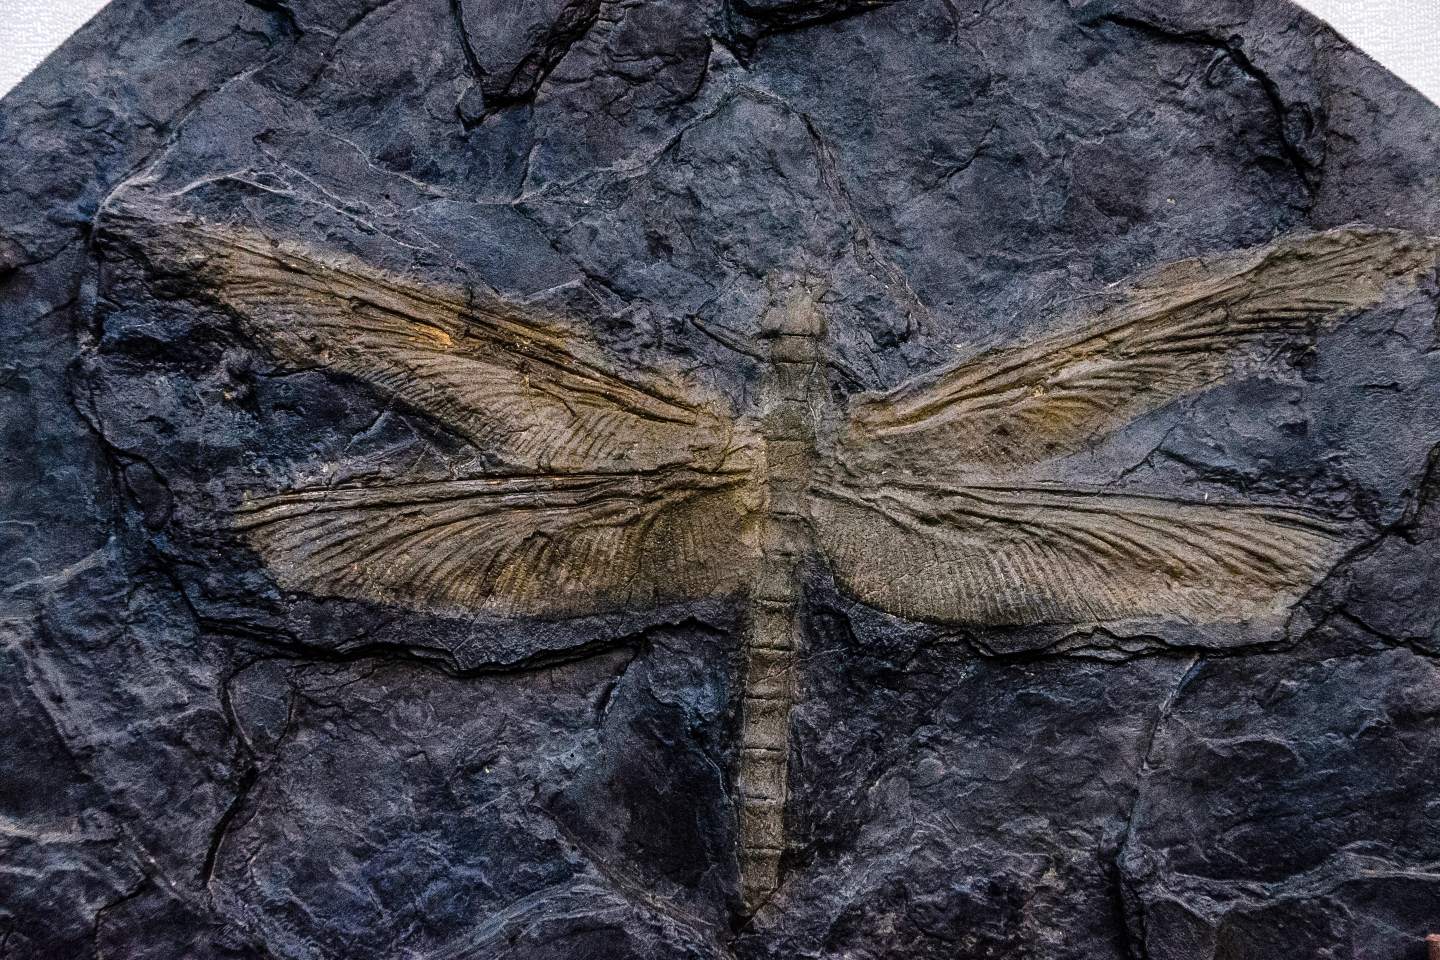 The largest insect ever existed was a giant 'dragonfly' 2